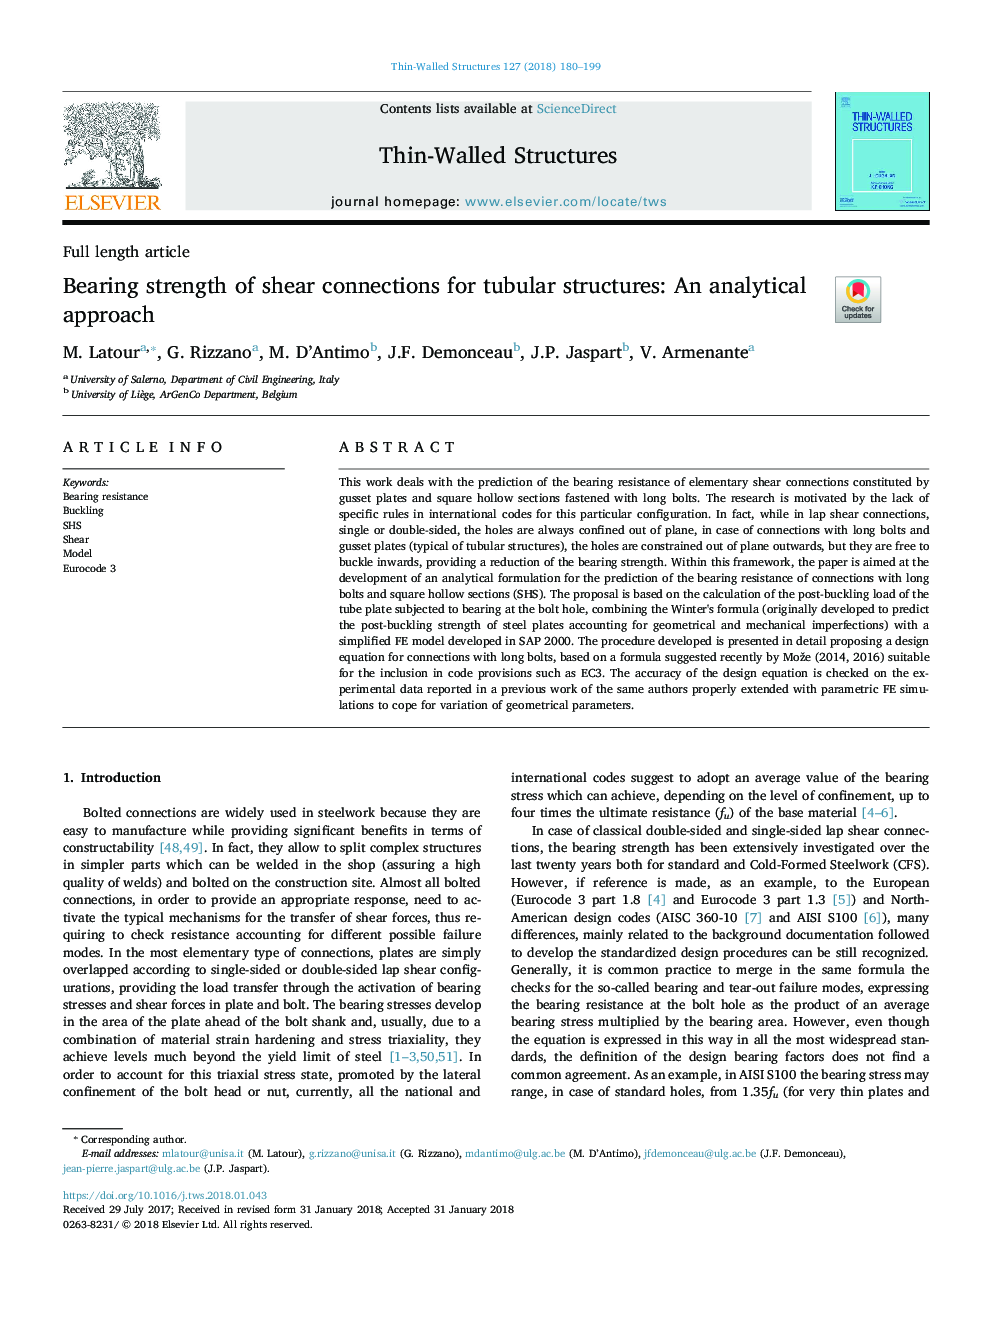 Bearing strength of shear connections for tubular structures: An analytical approach